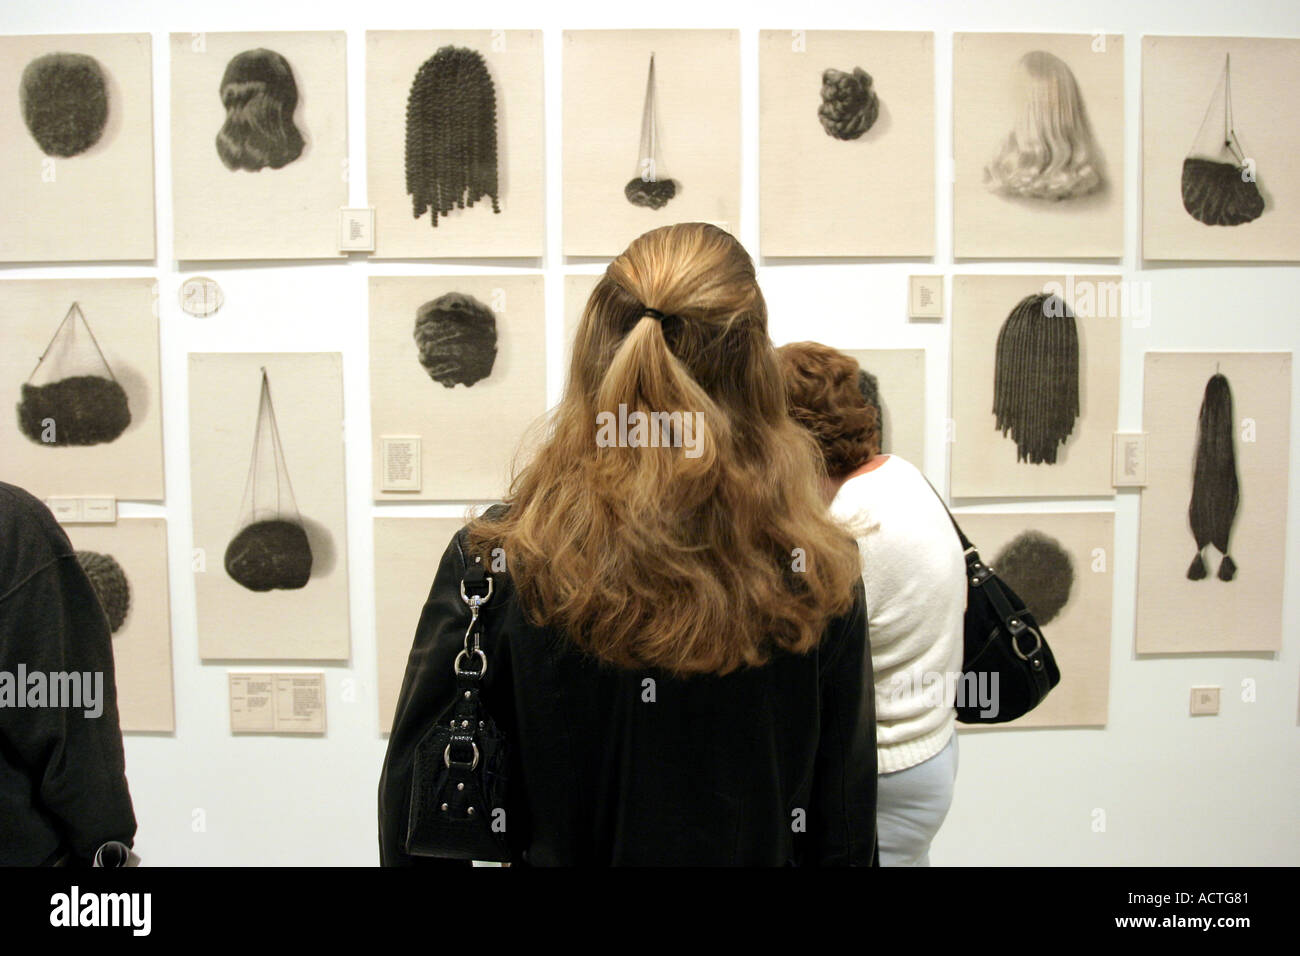 Visitor looking at hair sculpture in The Mueseum of Modern Art New York Stock Photo